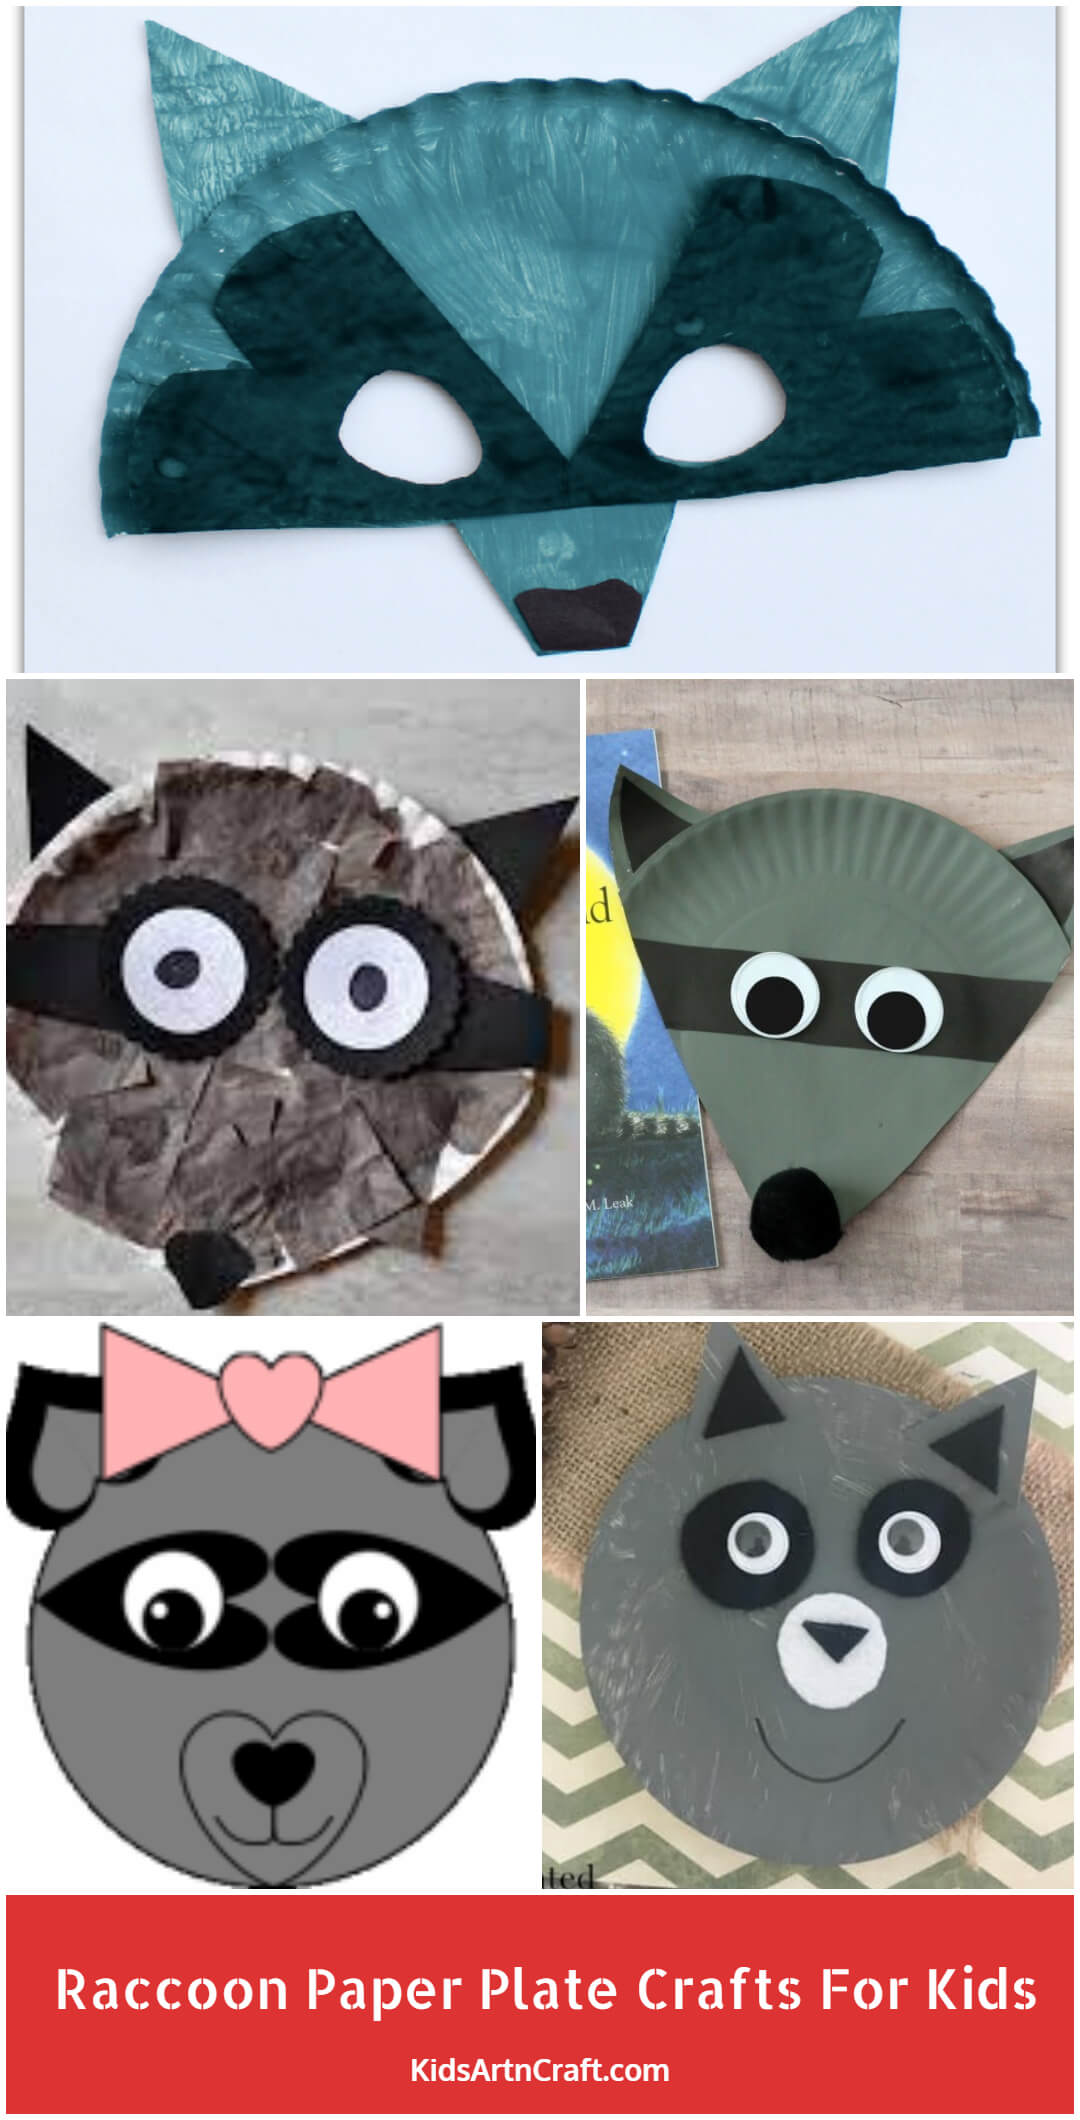 Raccoon Paper Plate Crafts For Kids